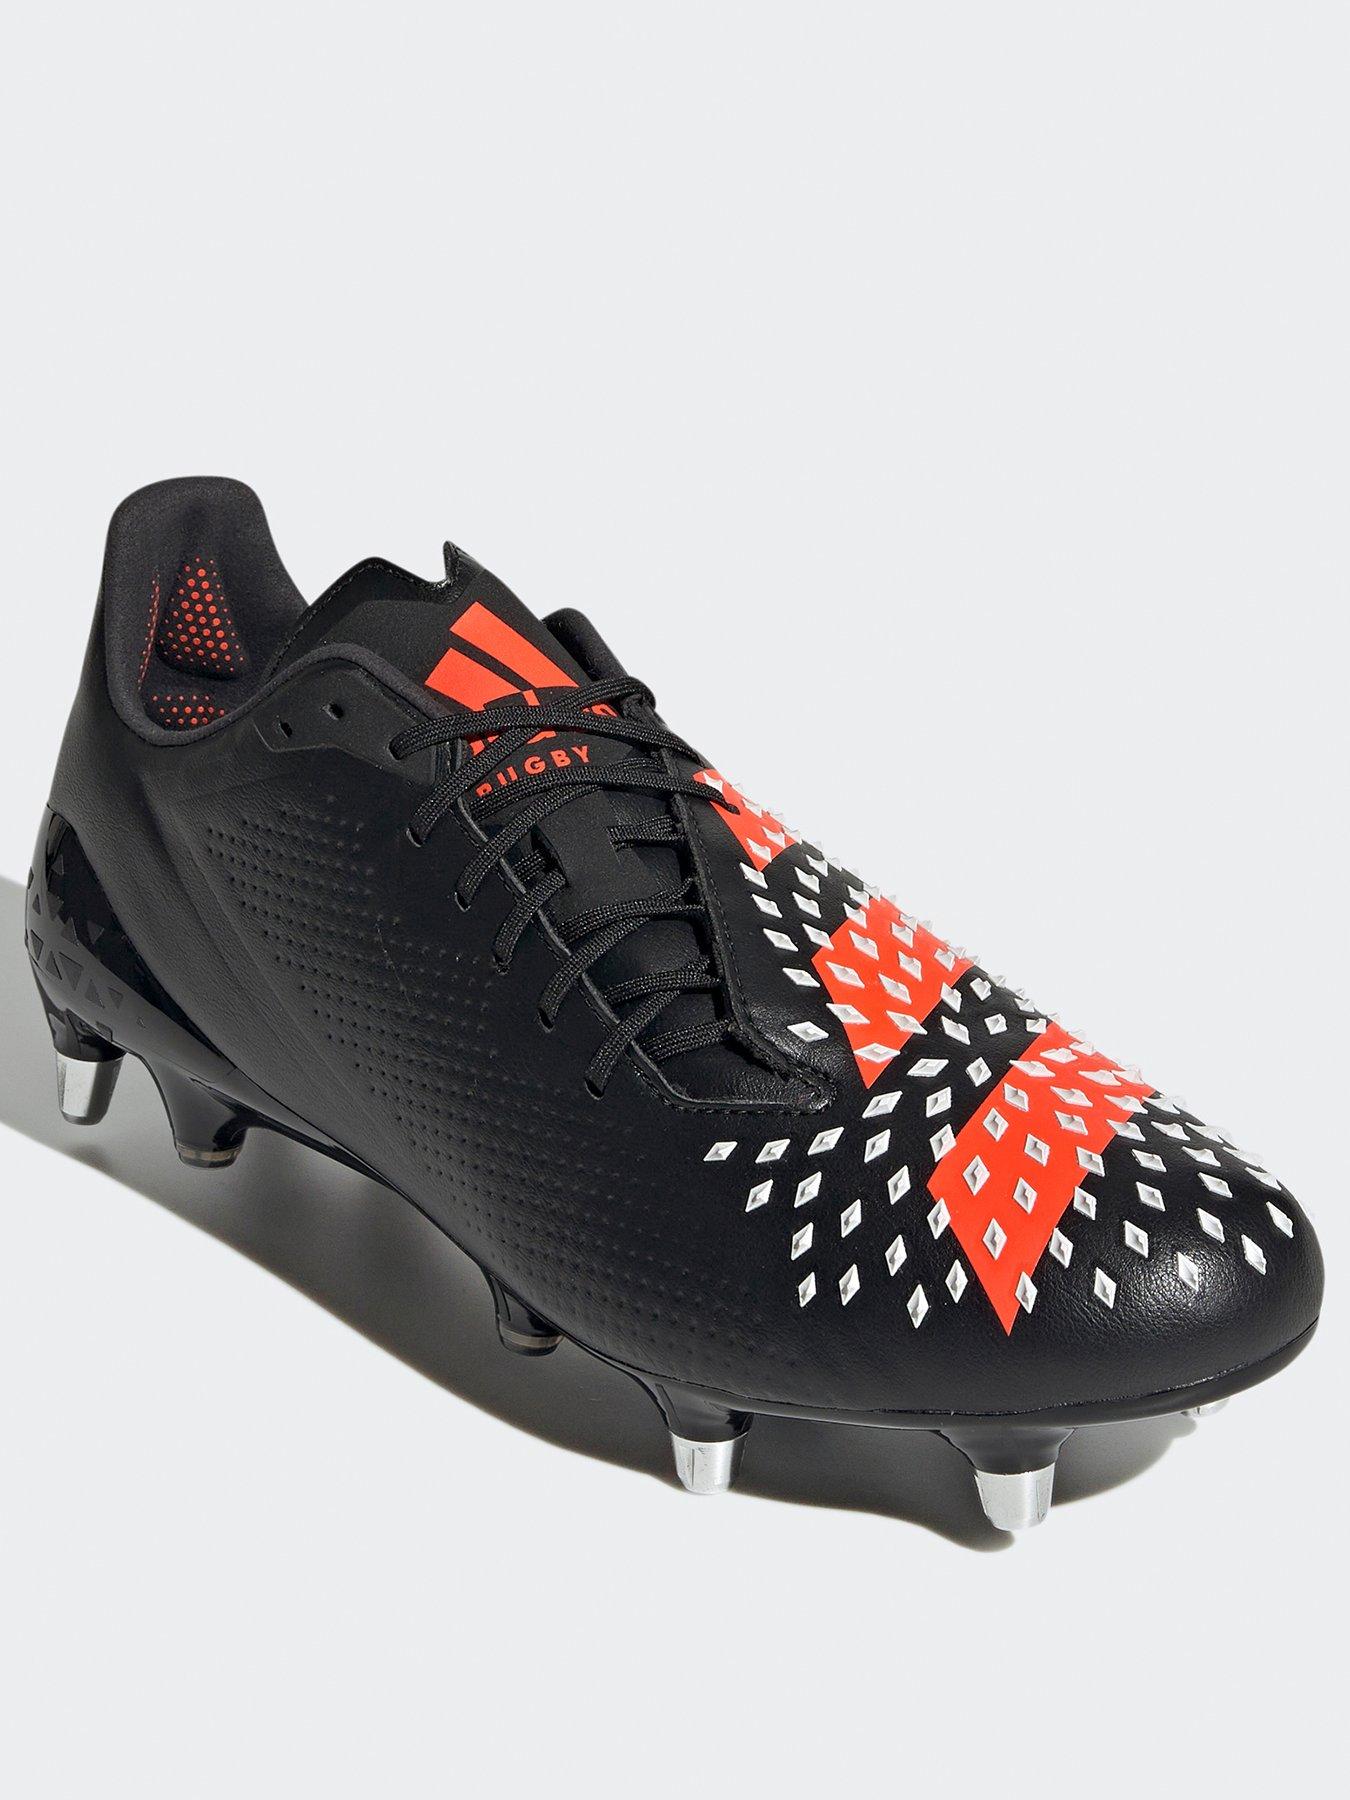  Rugby Predator Malice Sg Boots